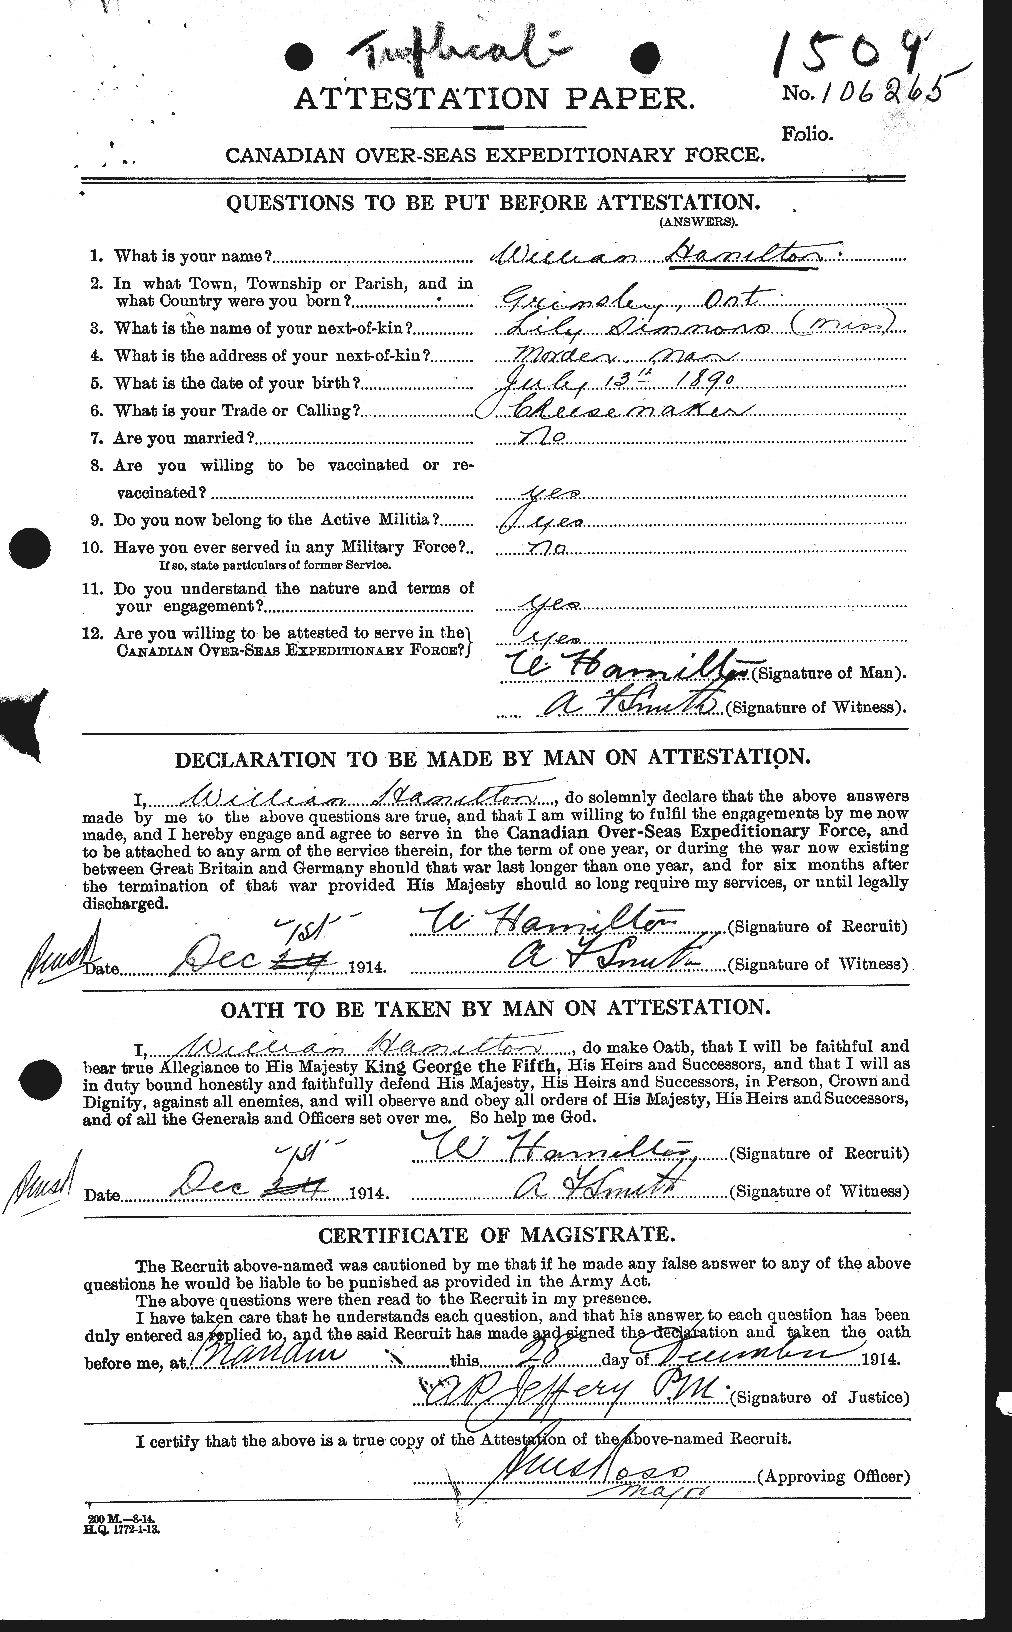 Personnel Records of the First World War - CEF 374843a